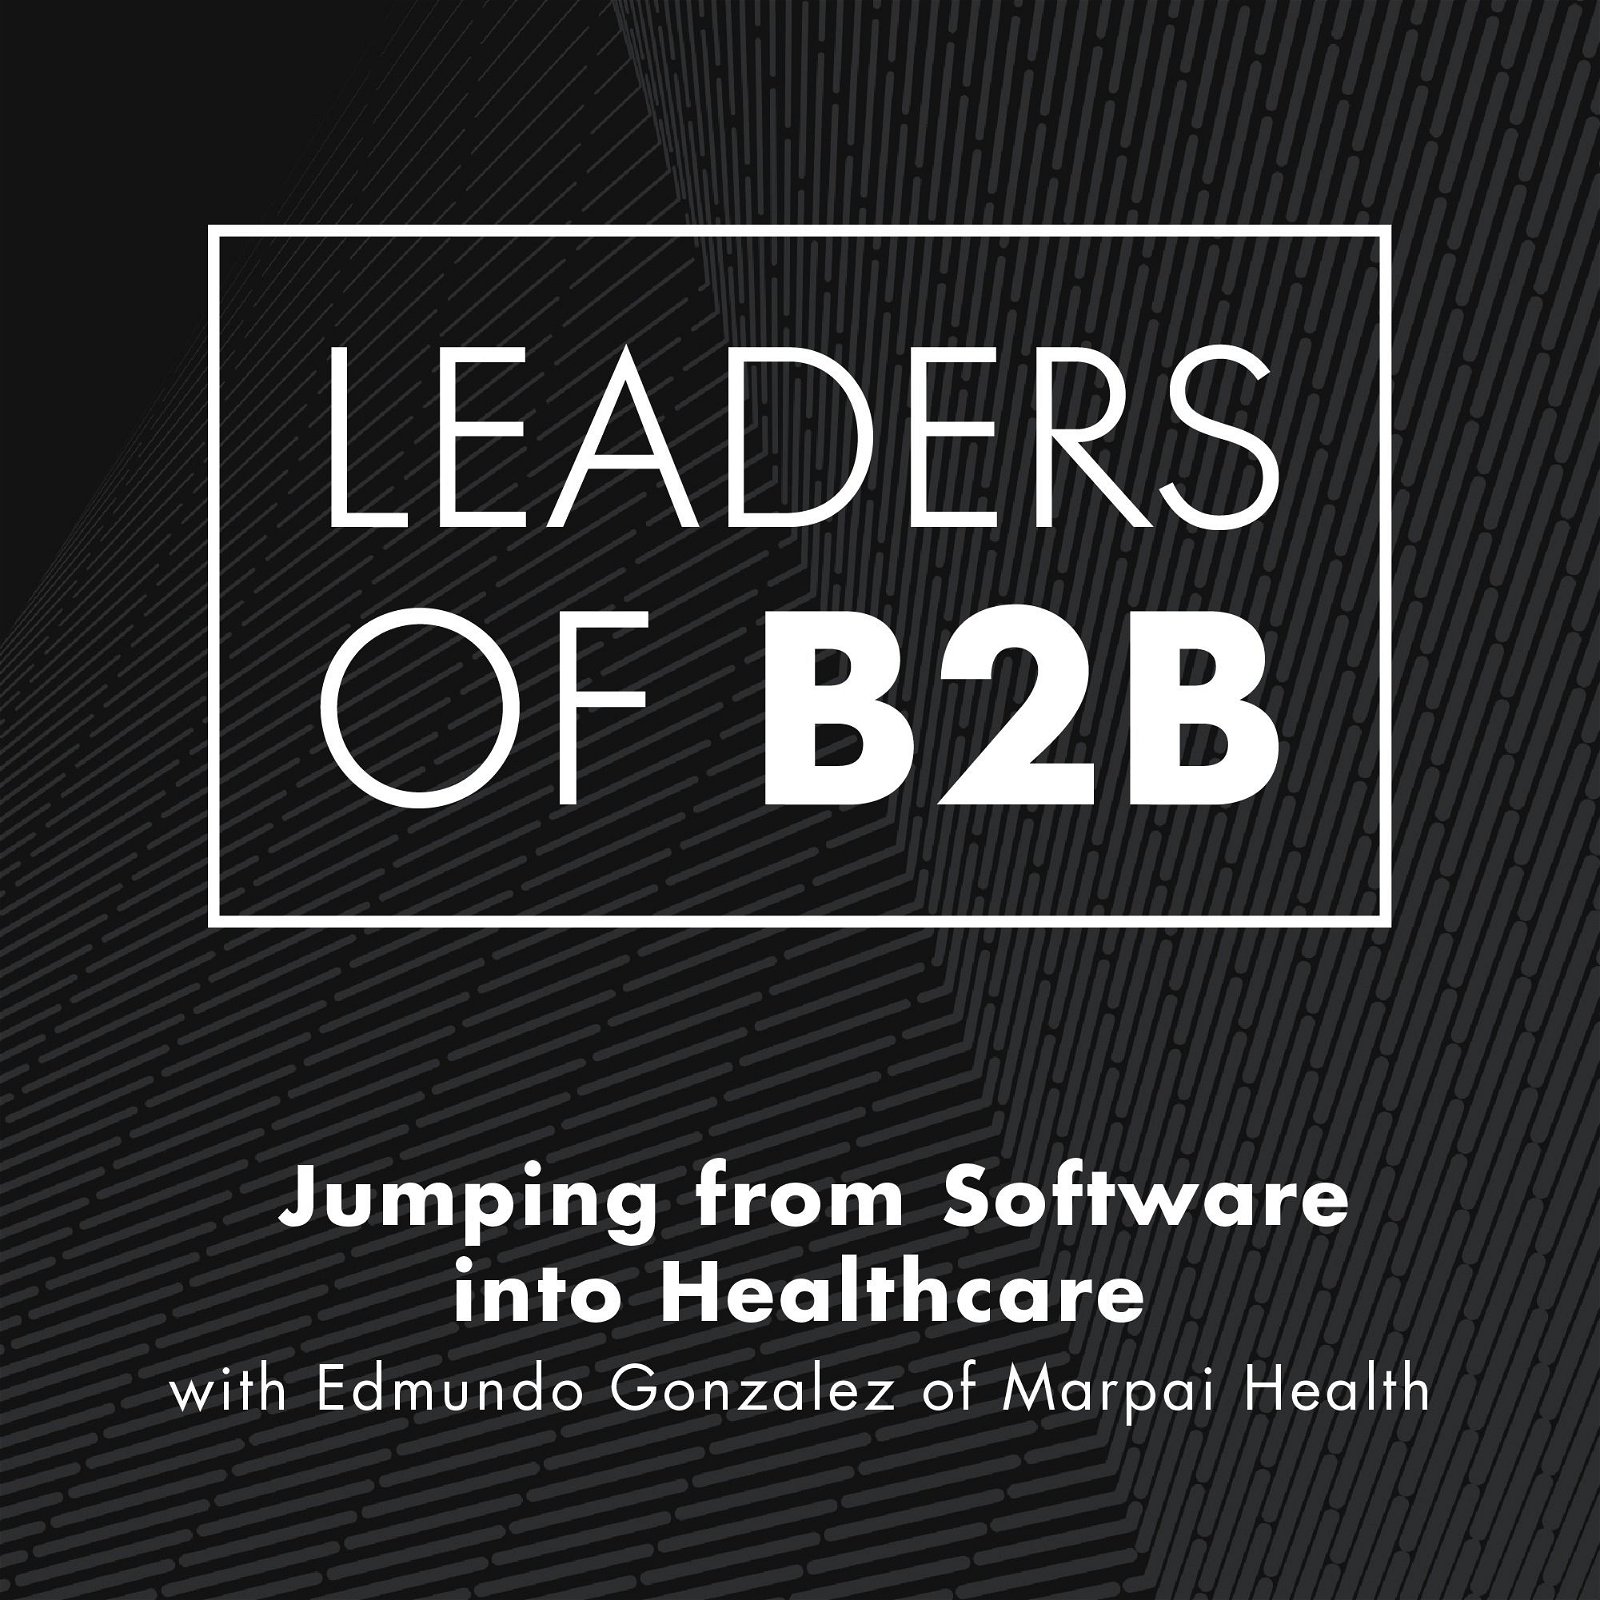 Jumping from Software into Healthcare, with Edmundo Gonzalez of Marpai Health